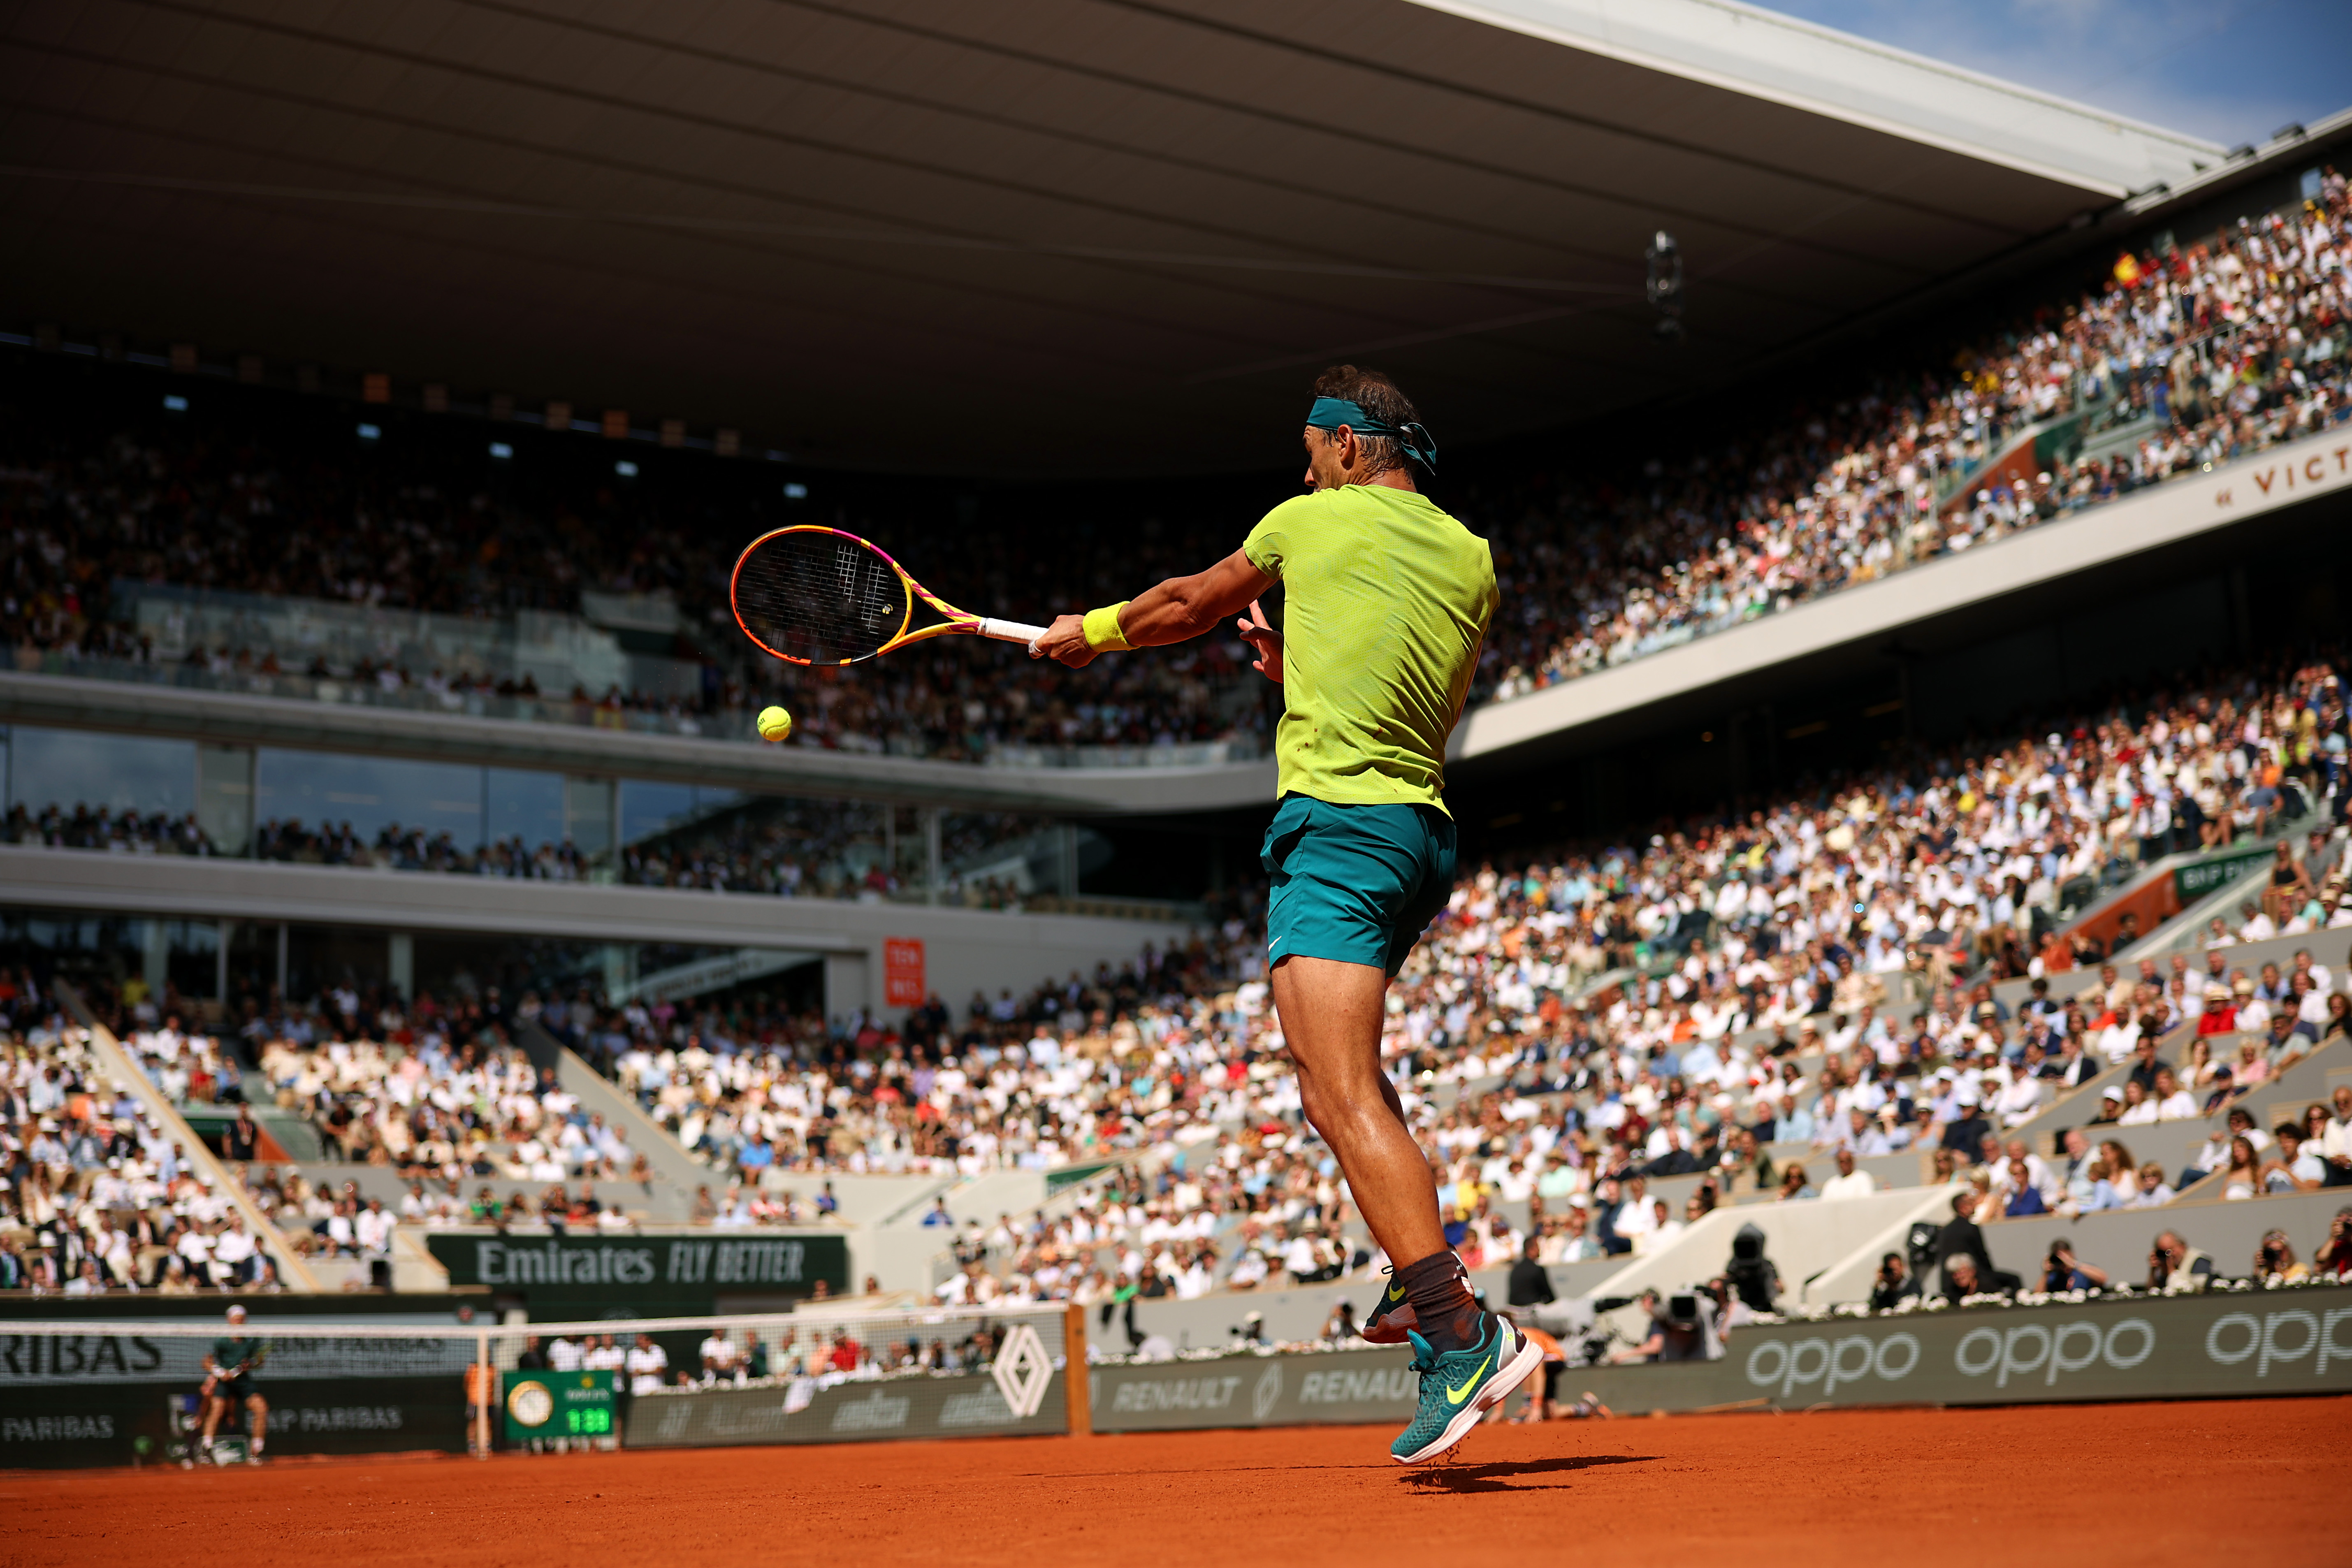 Rafael Nadal of Spain plays a forehand against Casper Ruud of Norway during the Men’s Singles Final match on Day 15 of The 2022 French Open at Roland Garros on June 05, 2022 in Paris, France.